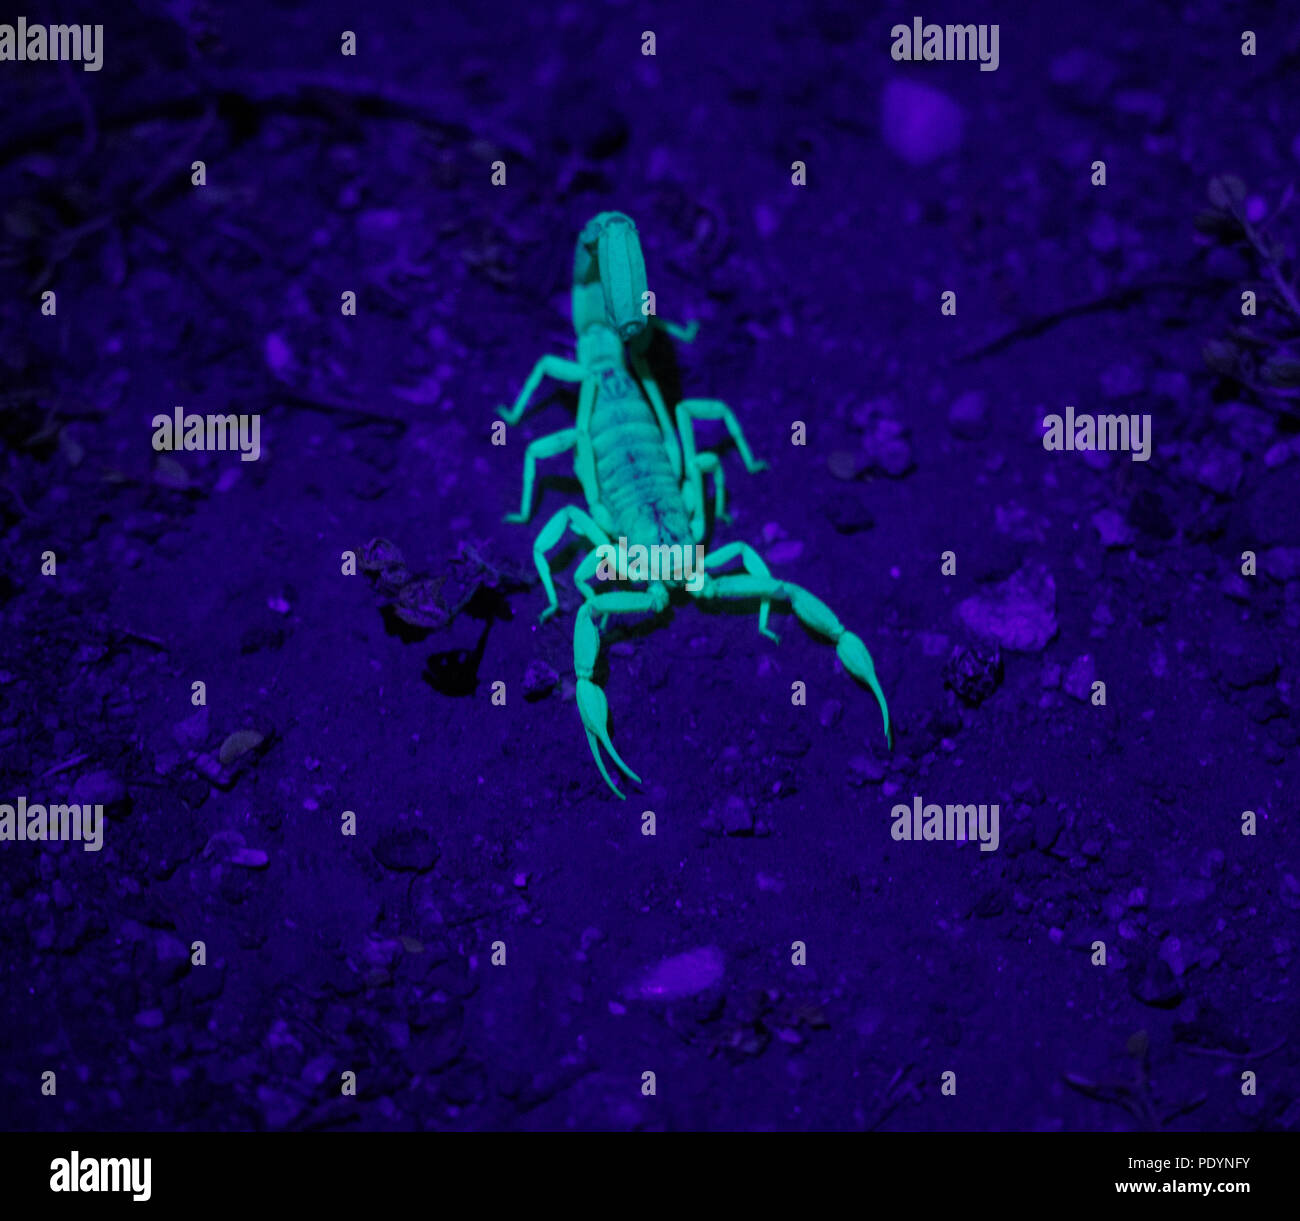 Scorpion in the Dark. Glowing insect and common bug of the desert. Small but deadly poisonous Scorpion. Stock Photo